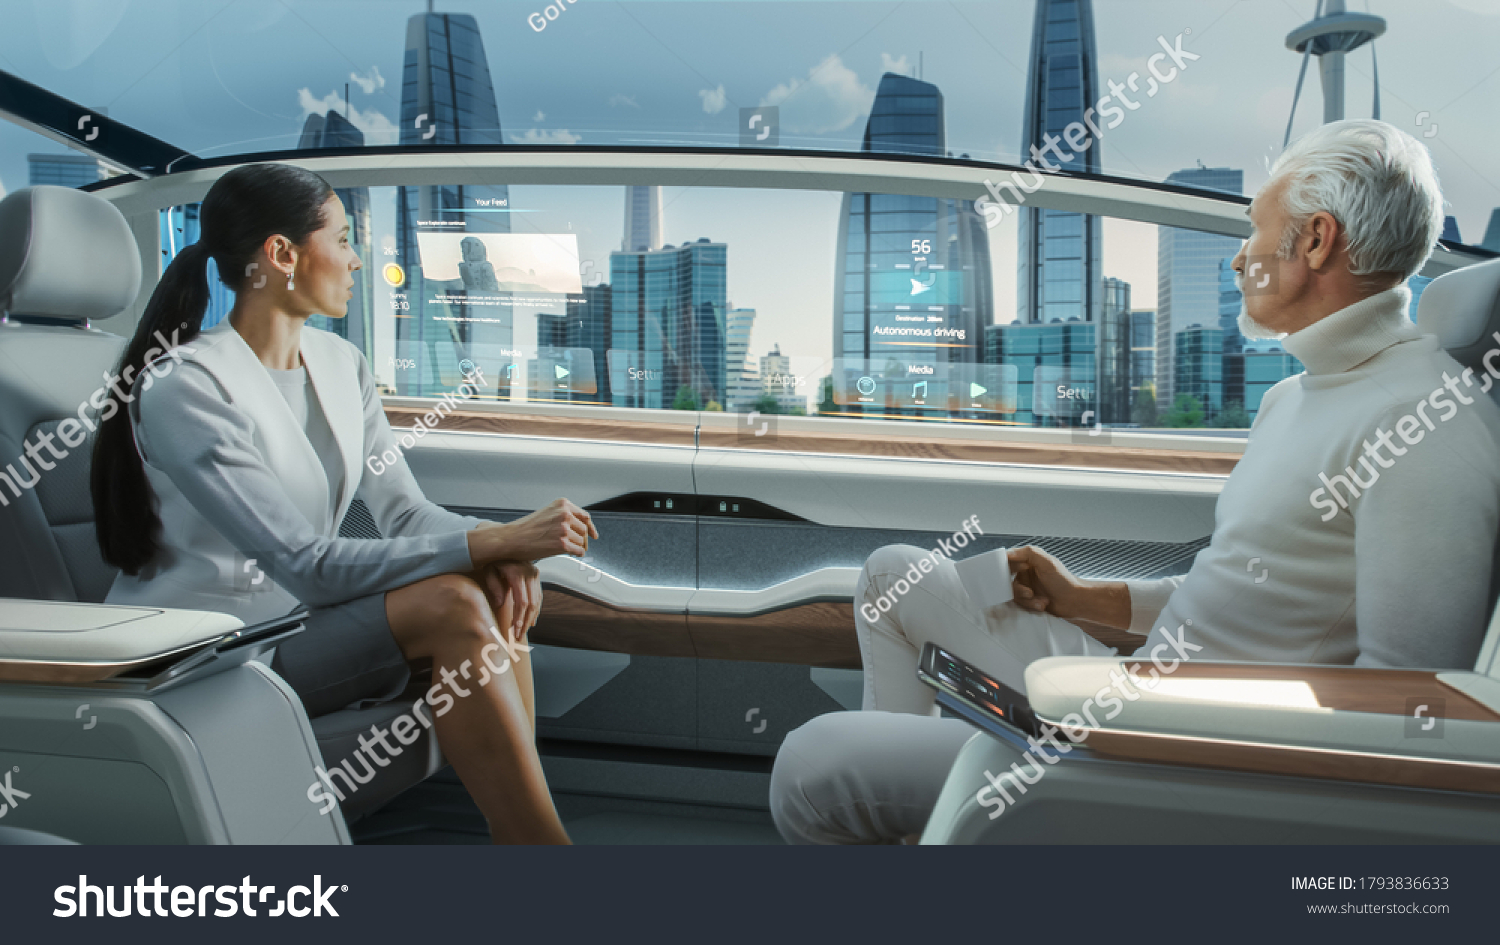 Beautiful Female and Senior Man are Having a Conversation in a Driverless Autonomous Vehicle. Futuristic Self-Driving Van is Moving on a Public Highway in a Modern City with Glass Skyscrapers. #1793836633